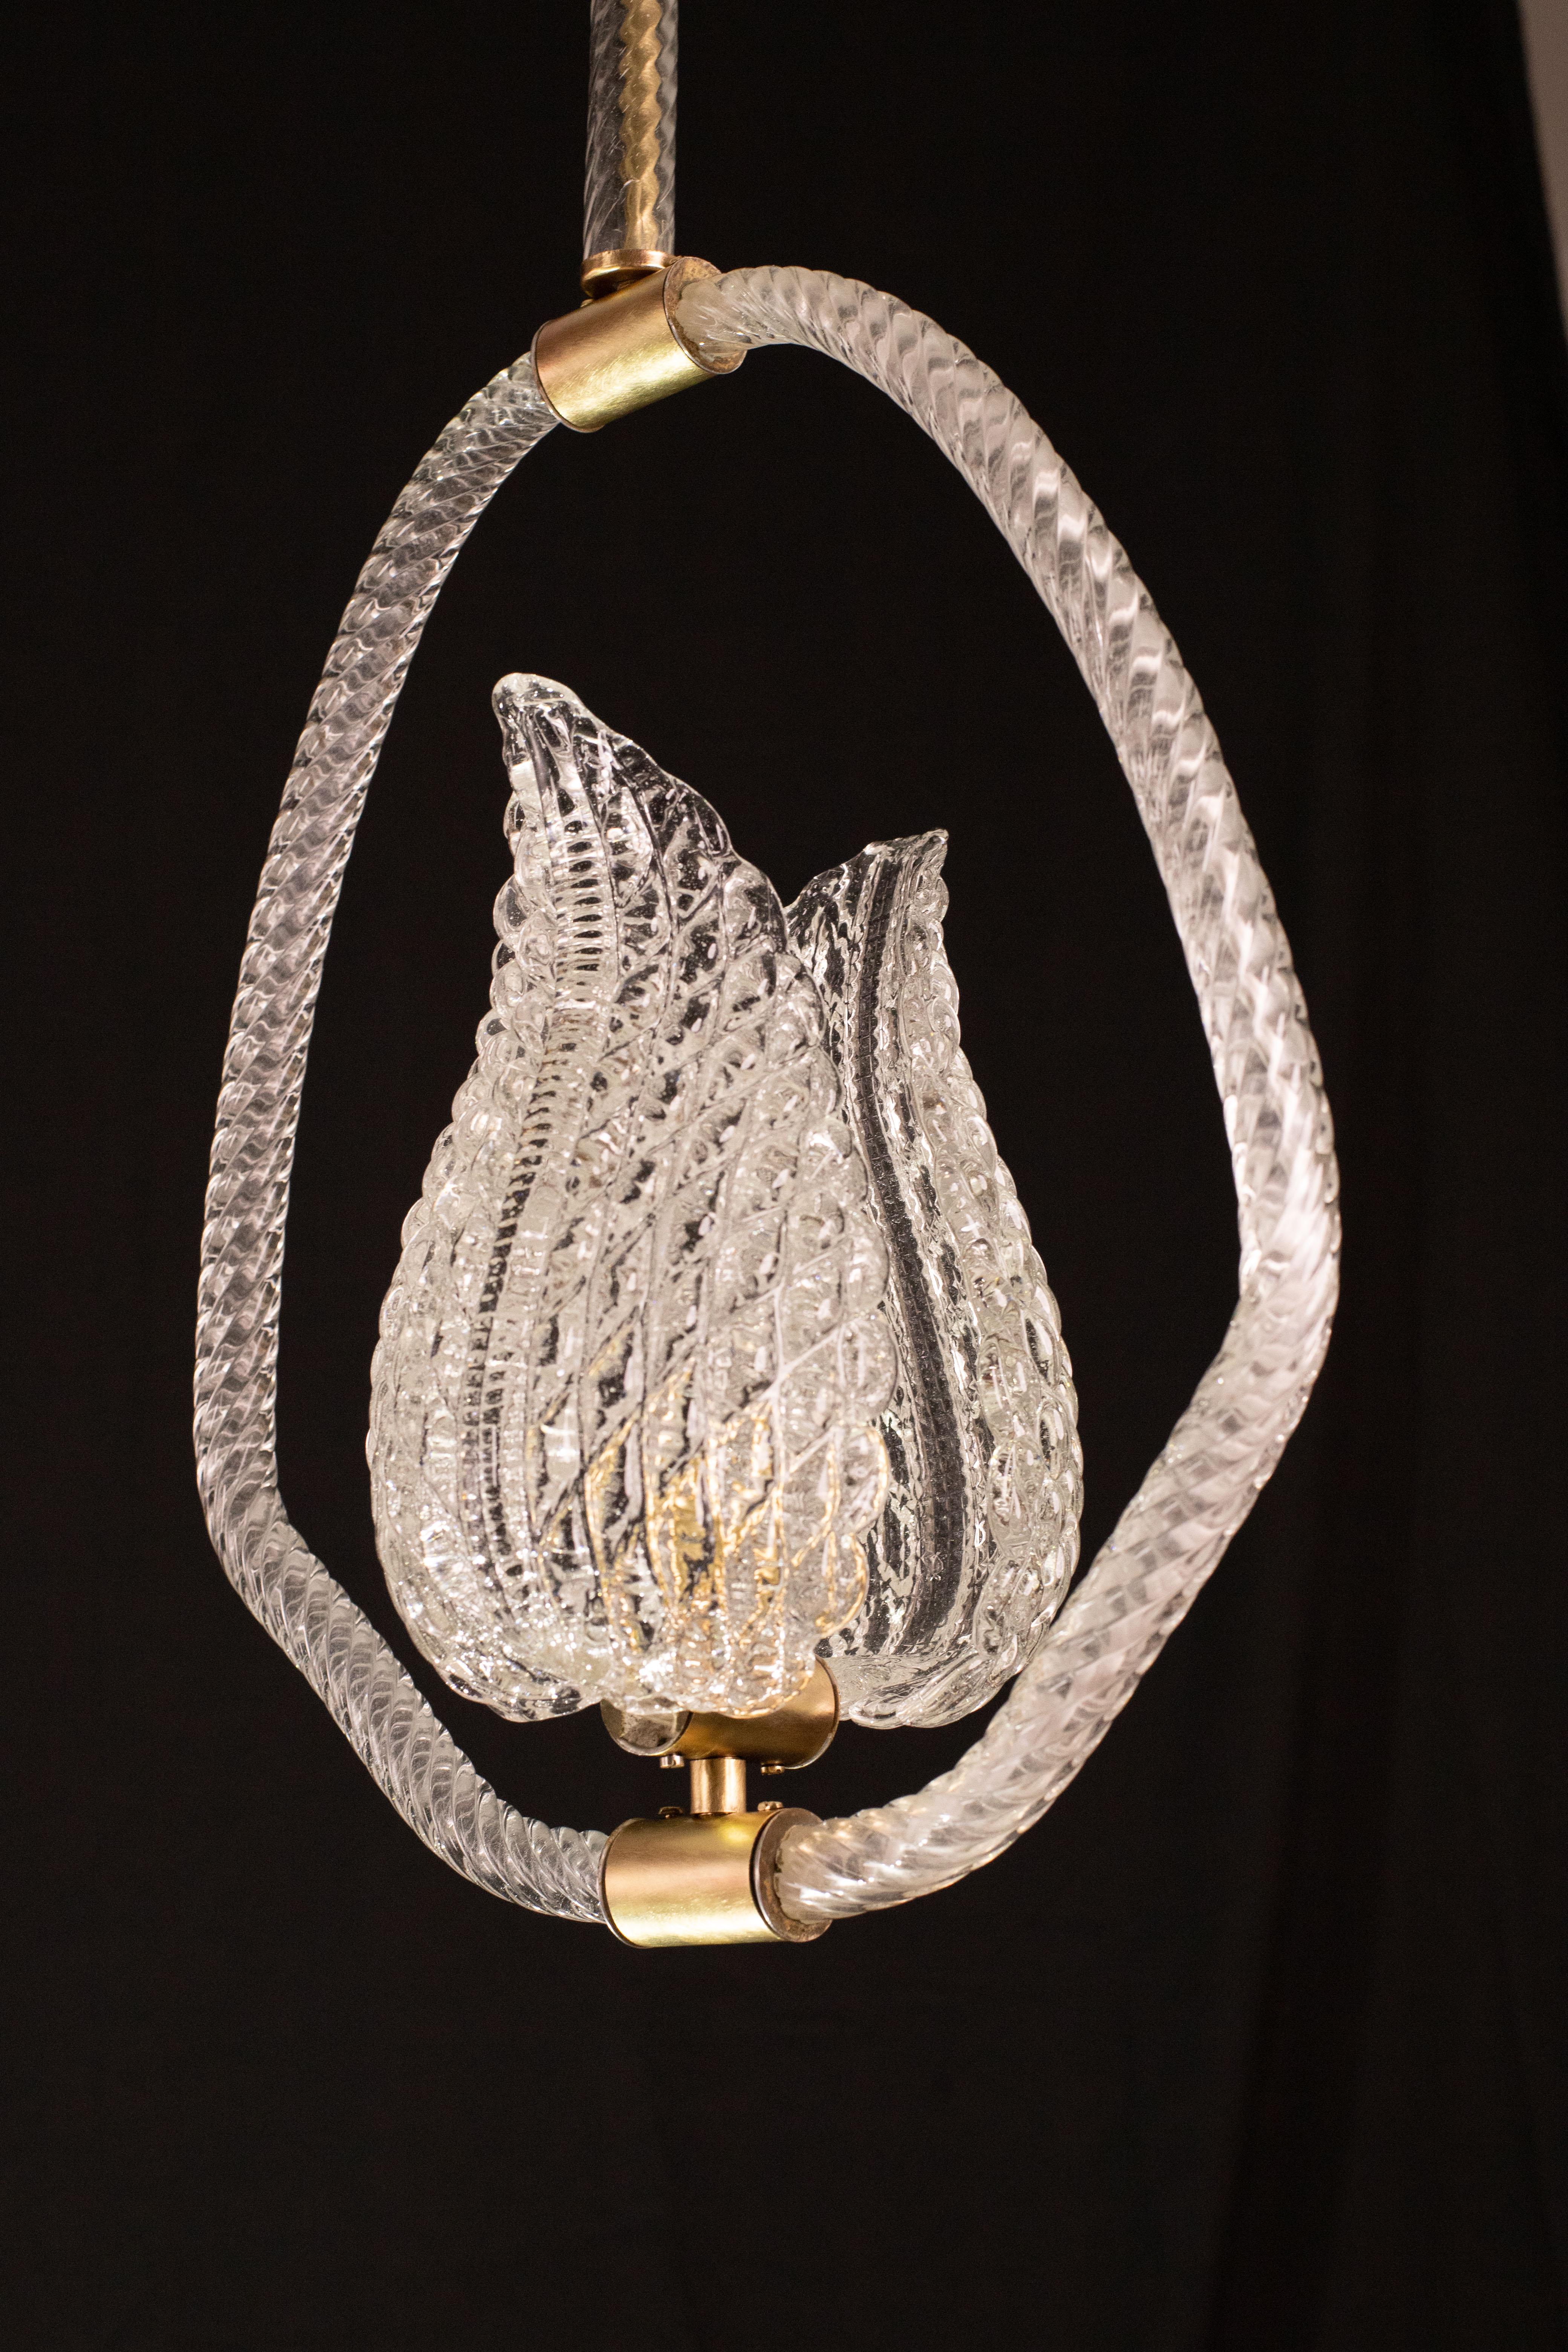 Trasparent Jewel Murano Glass Chandelier by Barovier e Toso, 1950s For Sale 6